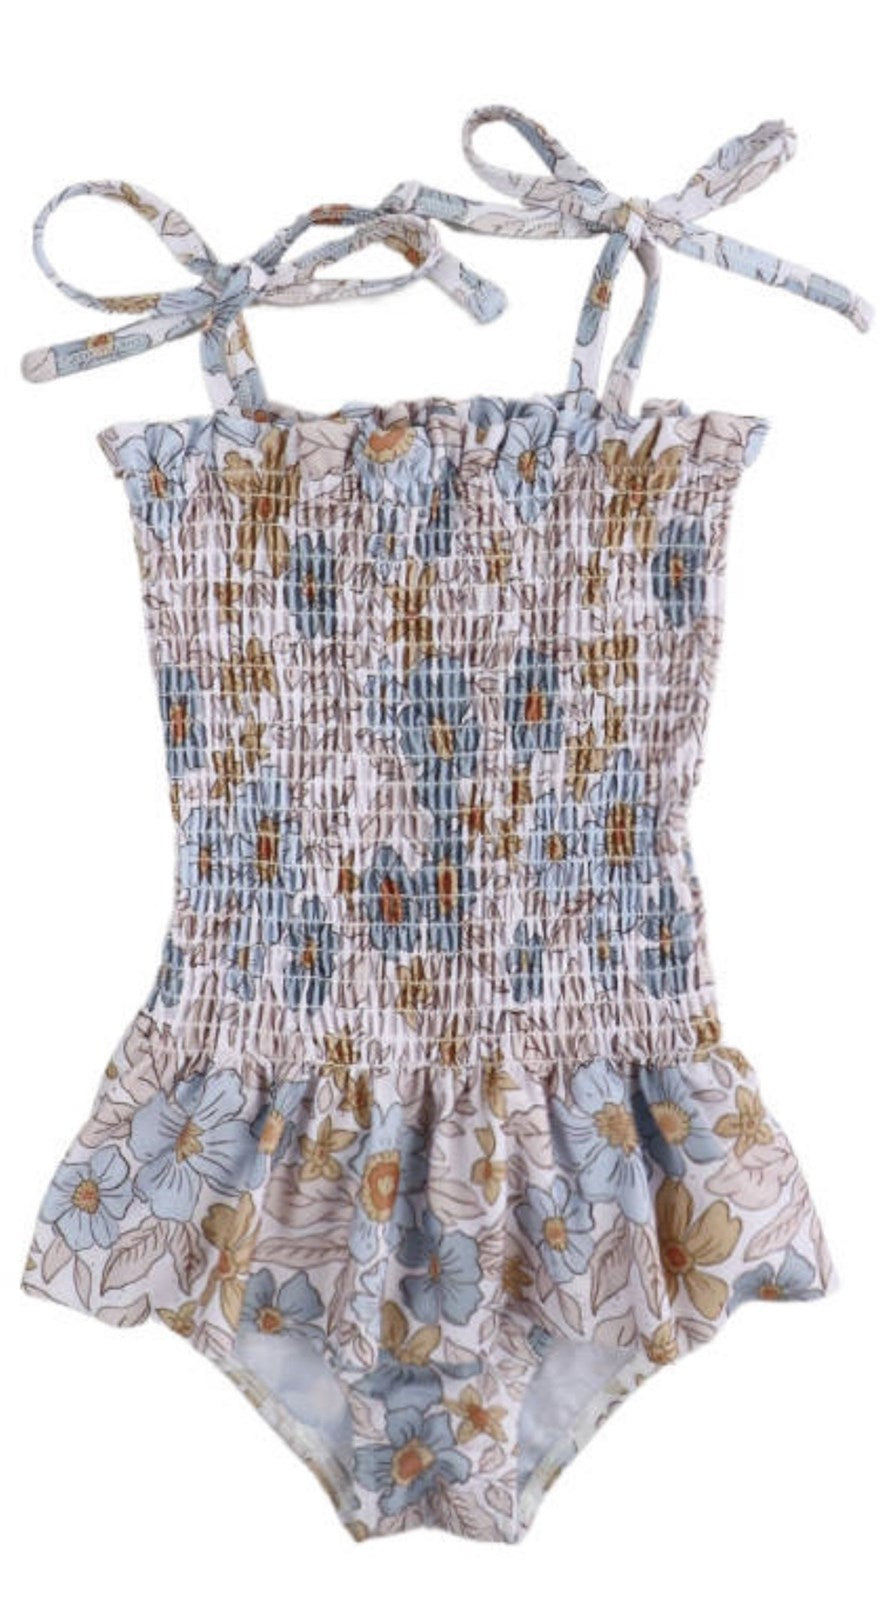 Girls Swimsuits - Blue & Tan Floral - 1 Pc Accordion